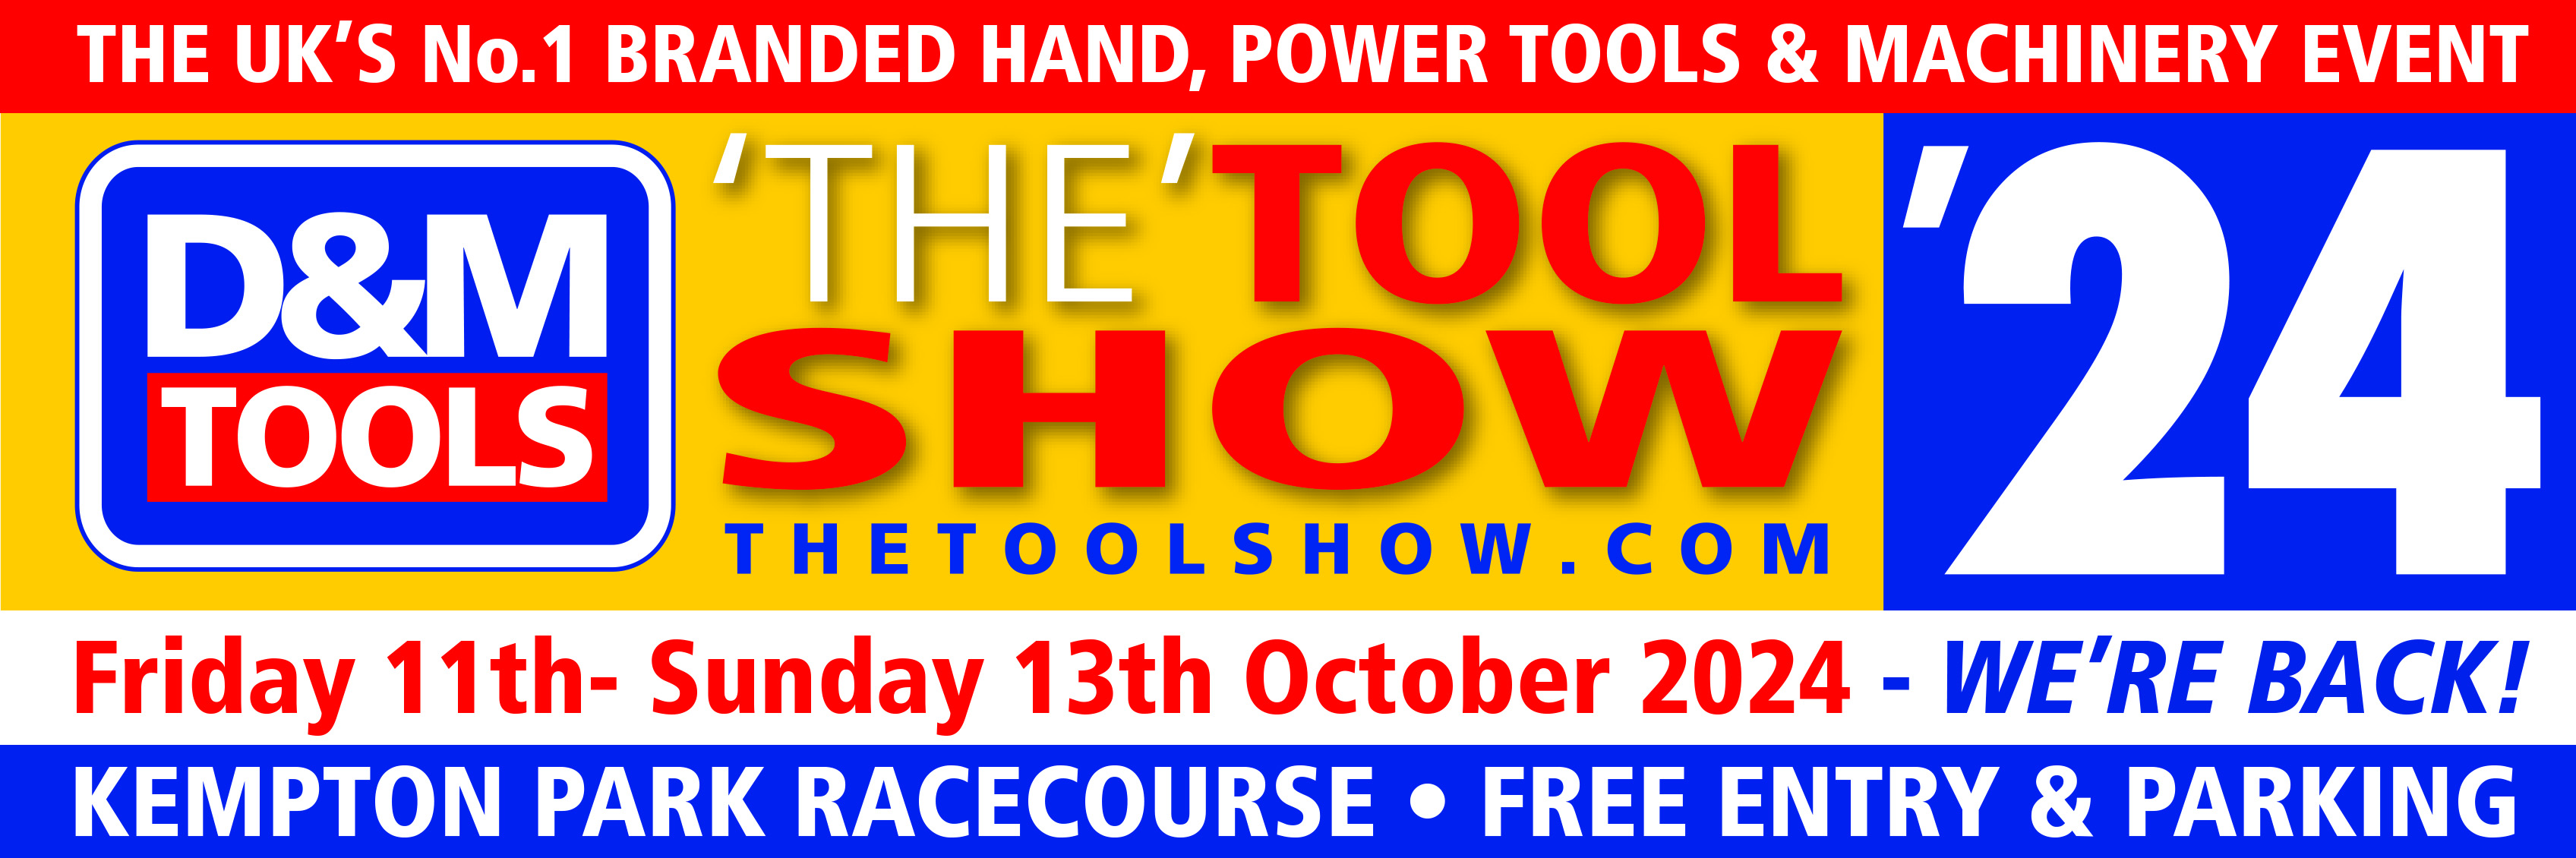 The Tool Show 2023 - Friday 11th - Sunday 13th October 2024